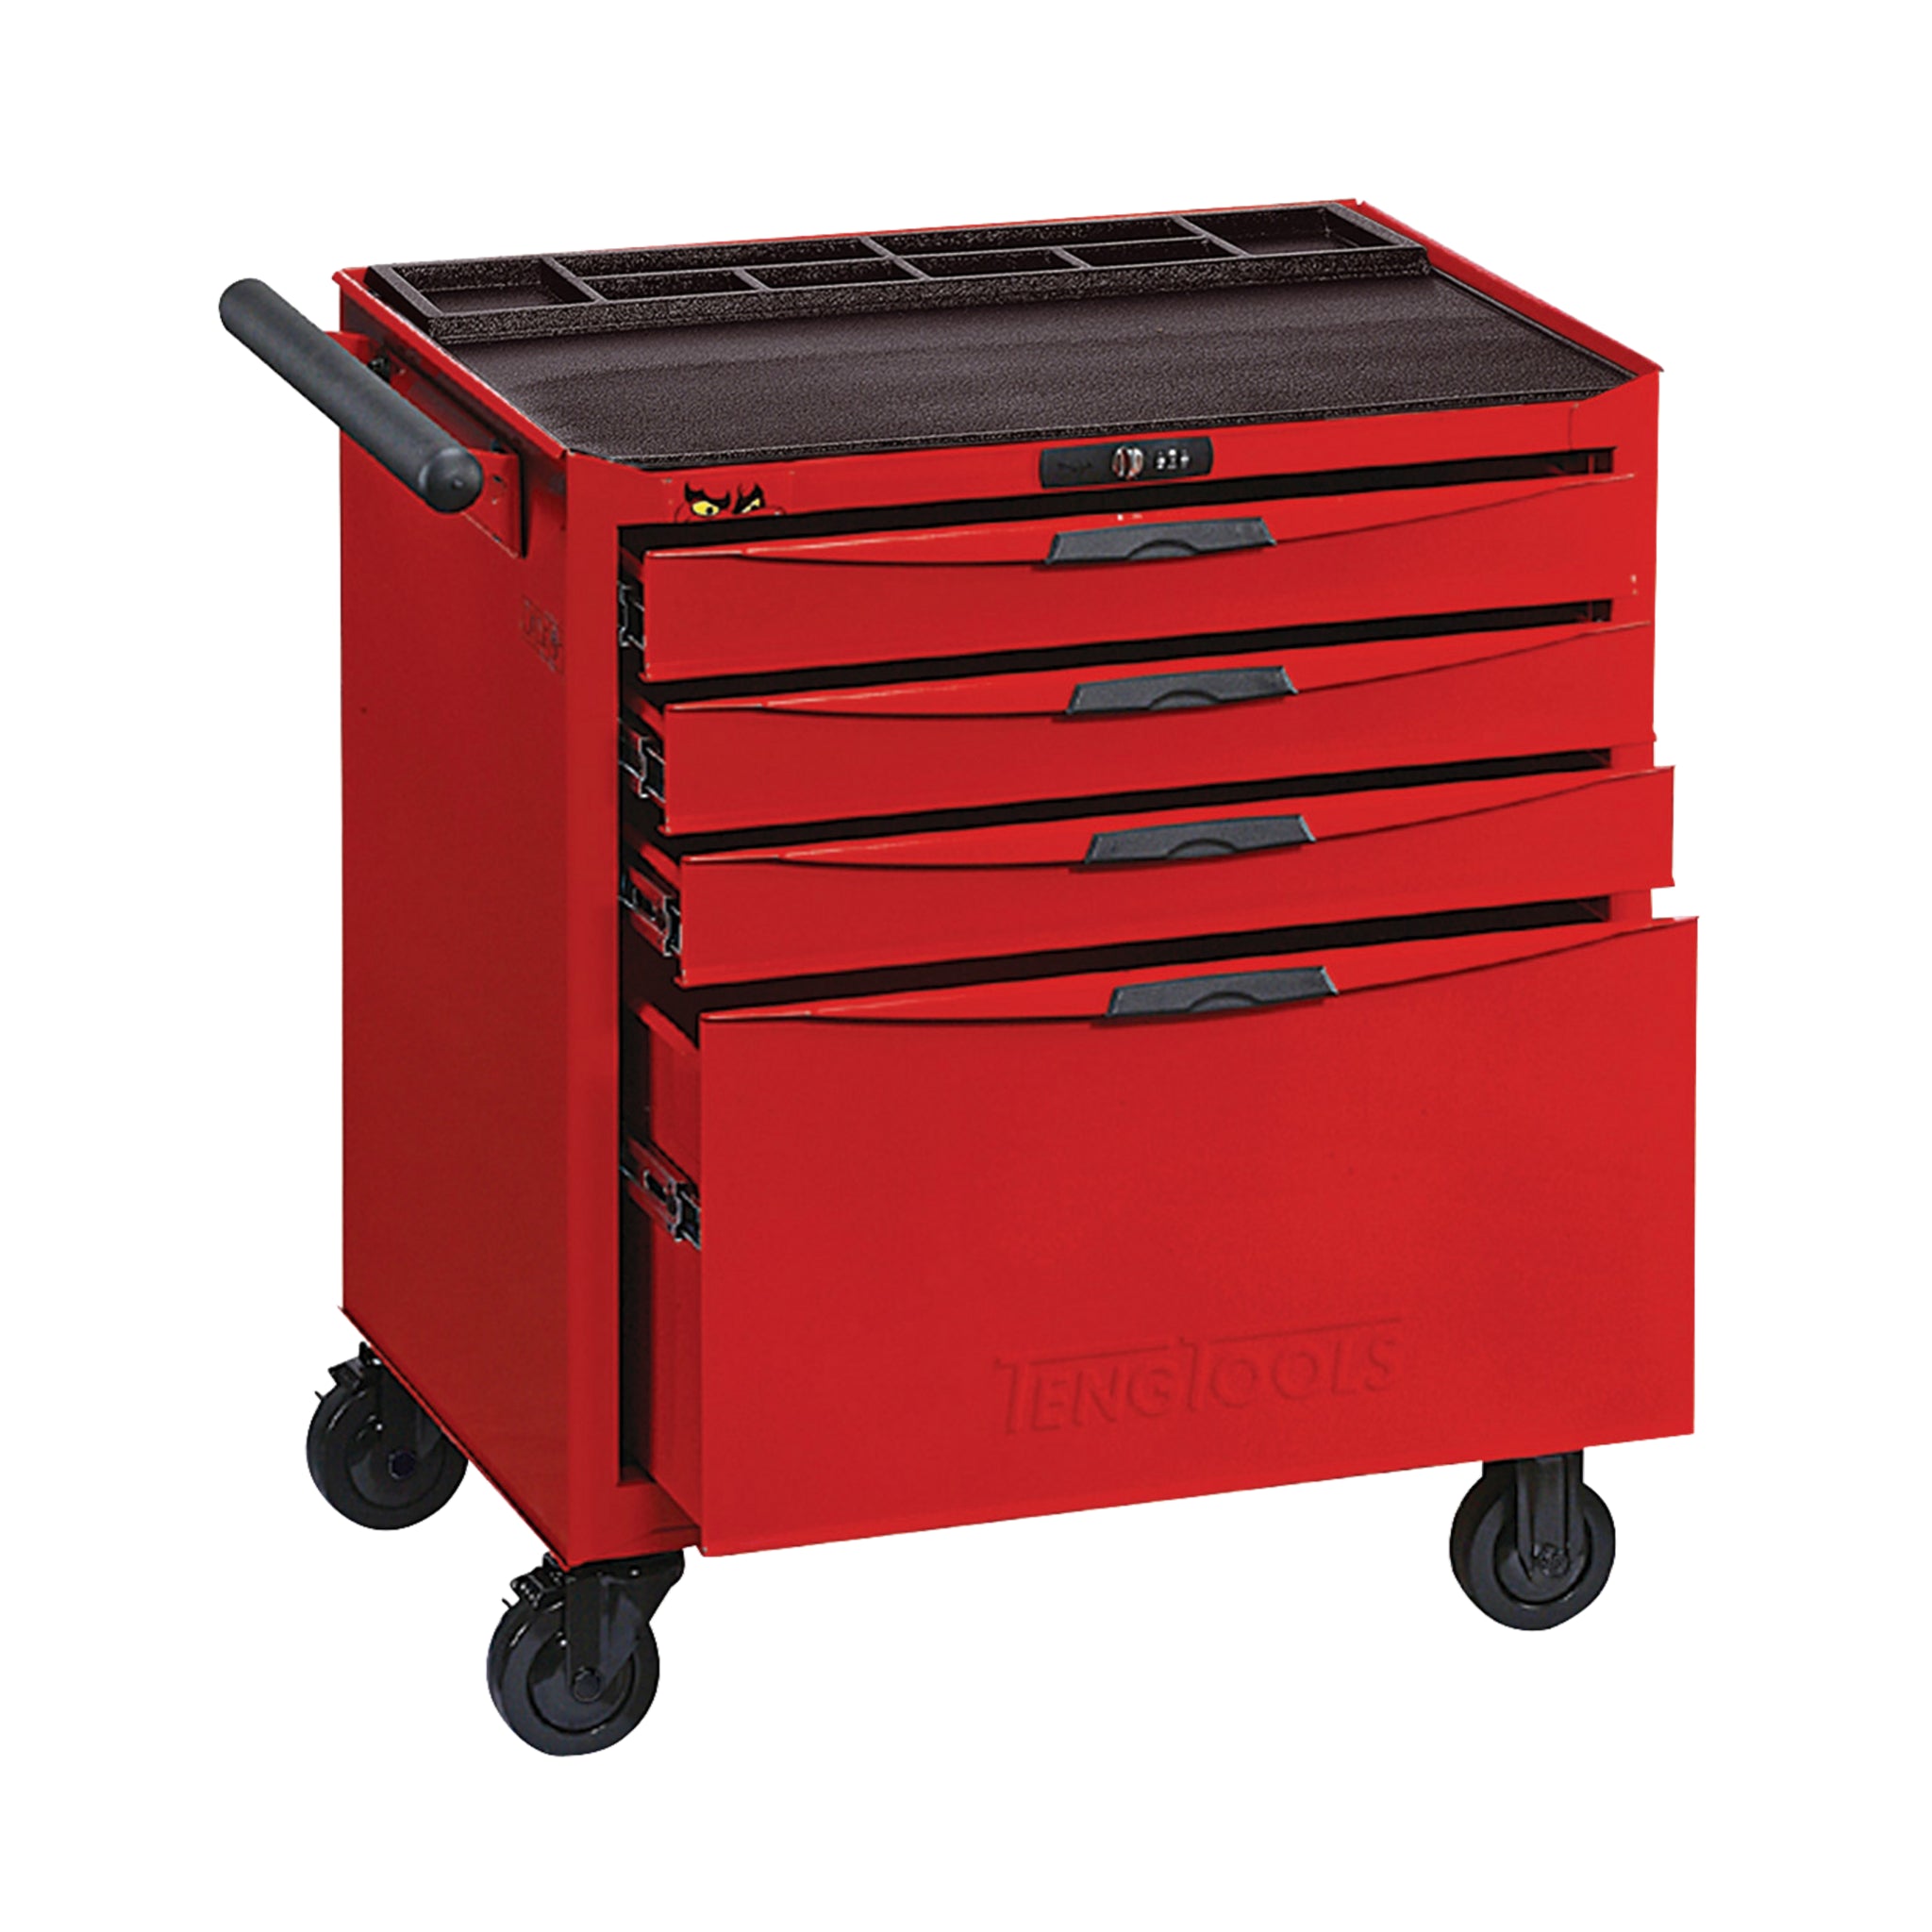 Teng Tools 4 Drawer Heavy Duty Roller Cabinet Tool Chest / Wagon - TCW804N